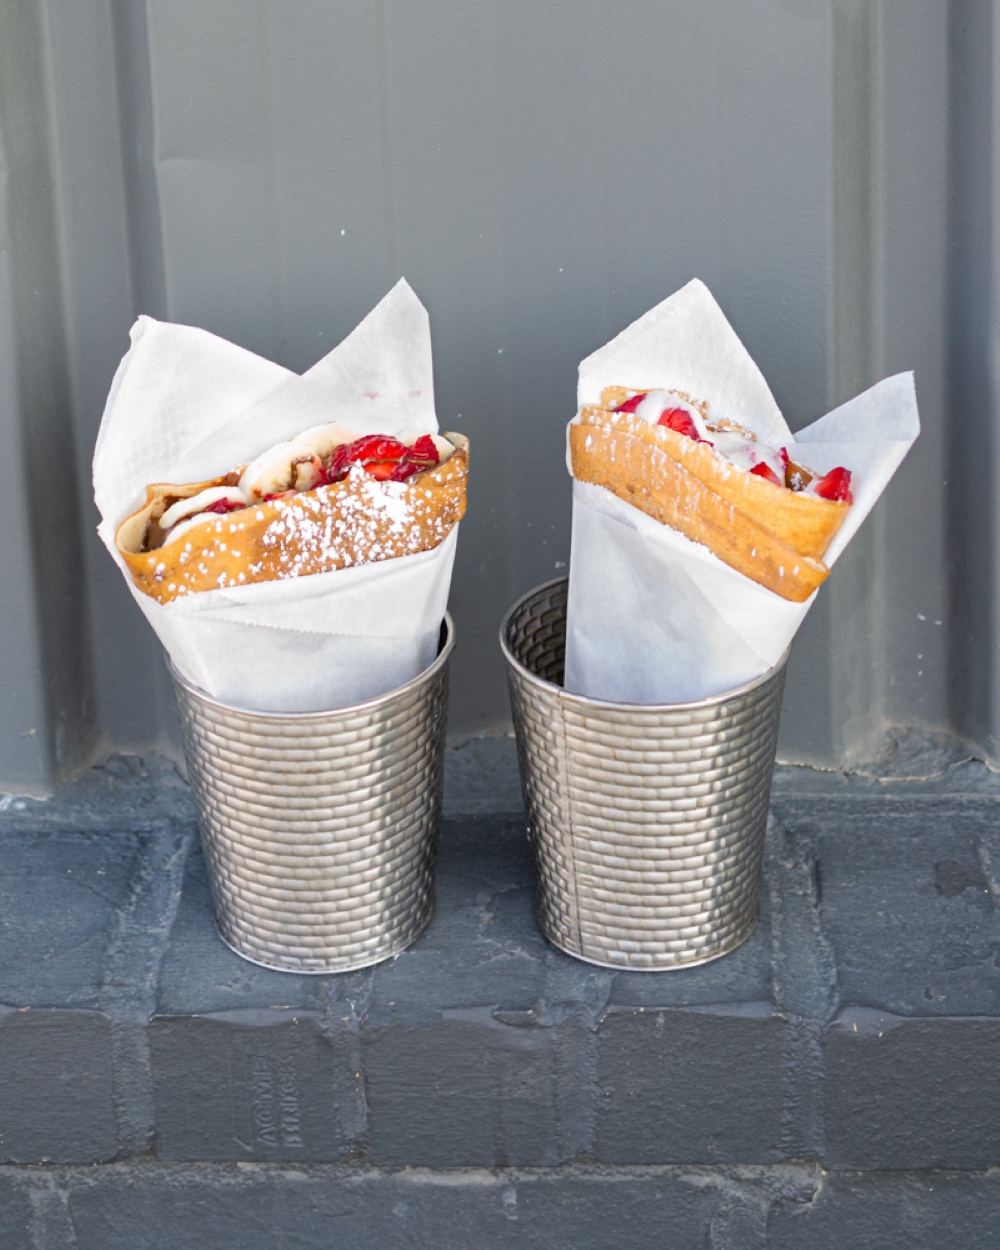 Crêpes wrapped in white deli paper sit in silver cans